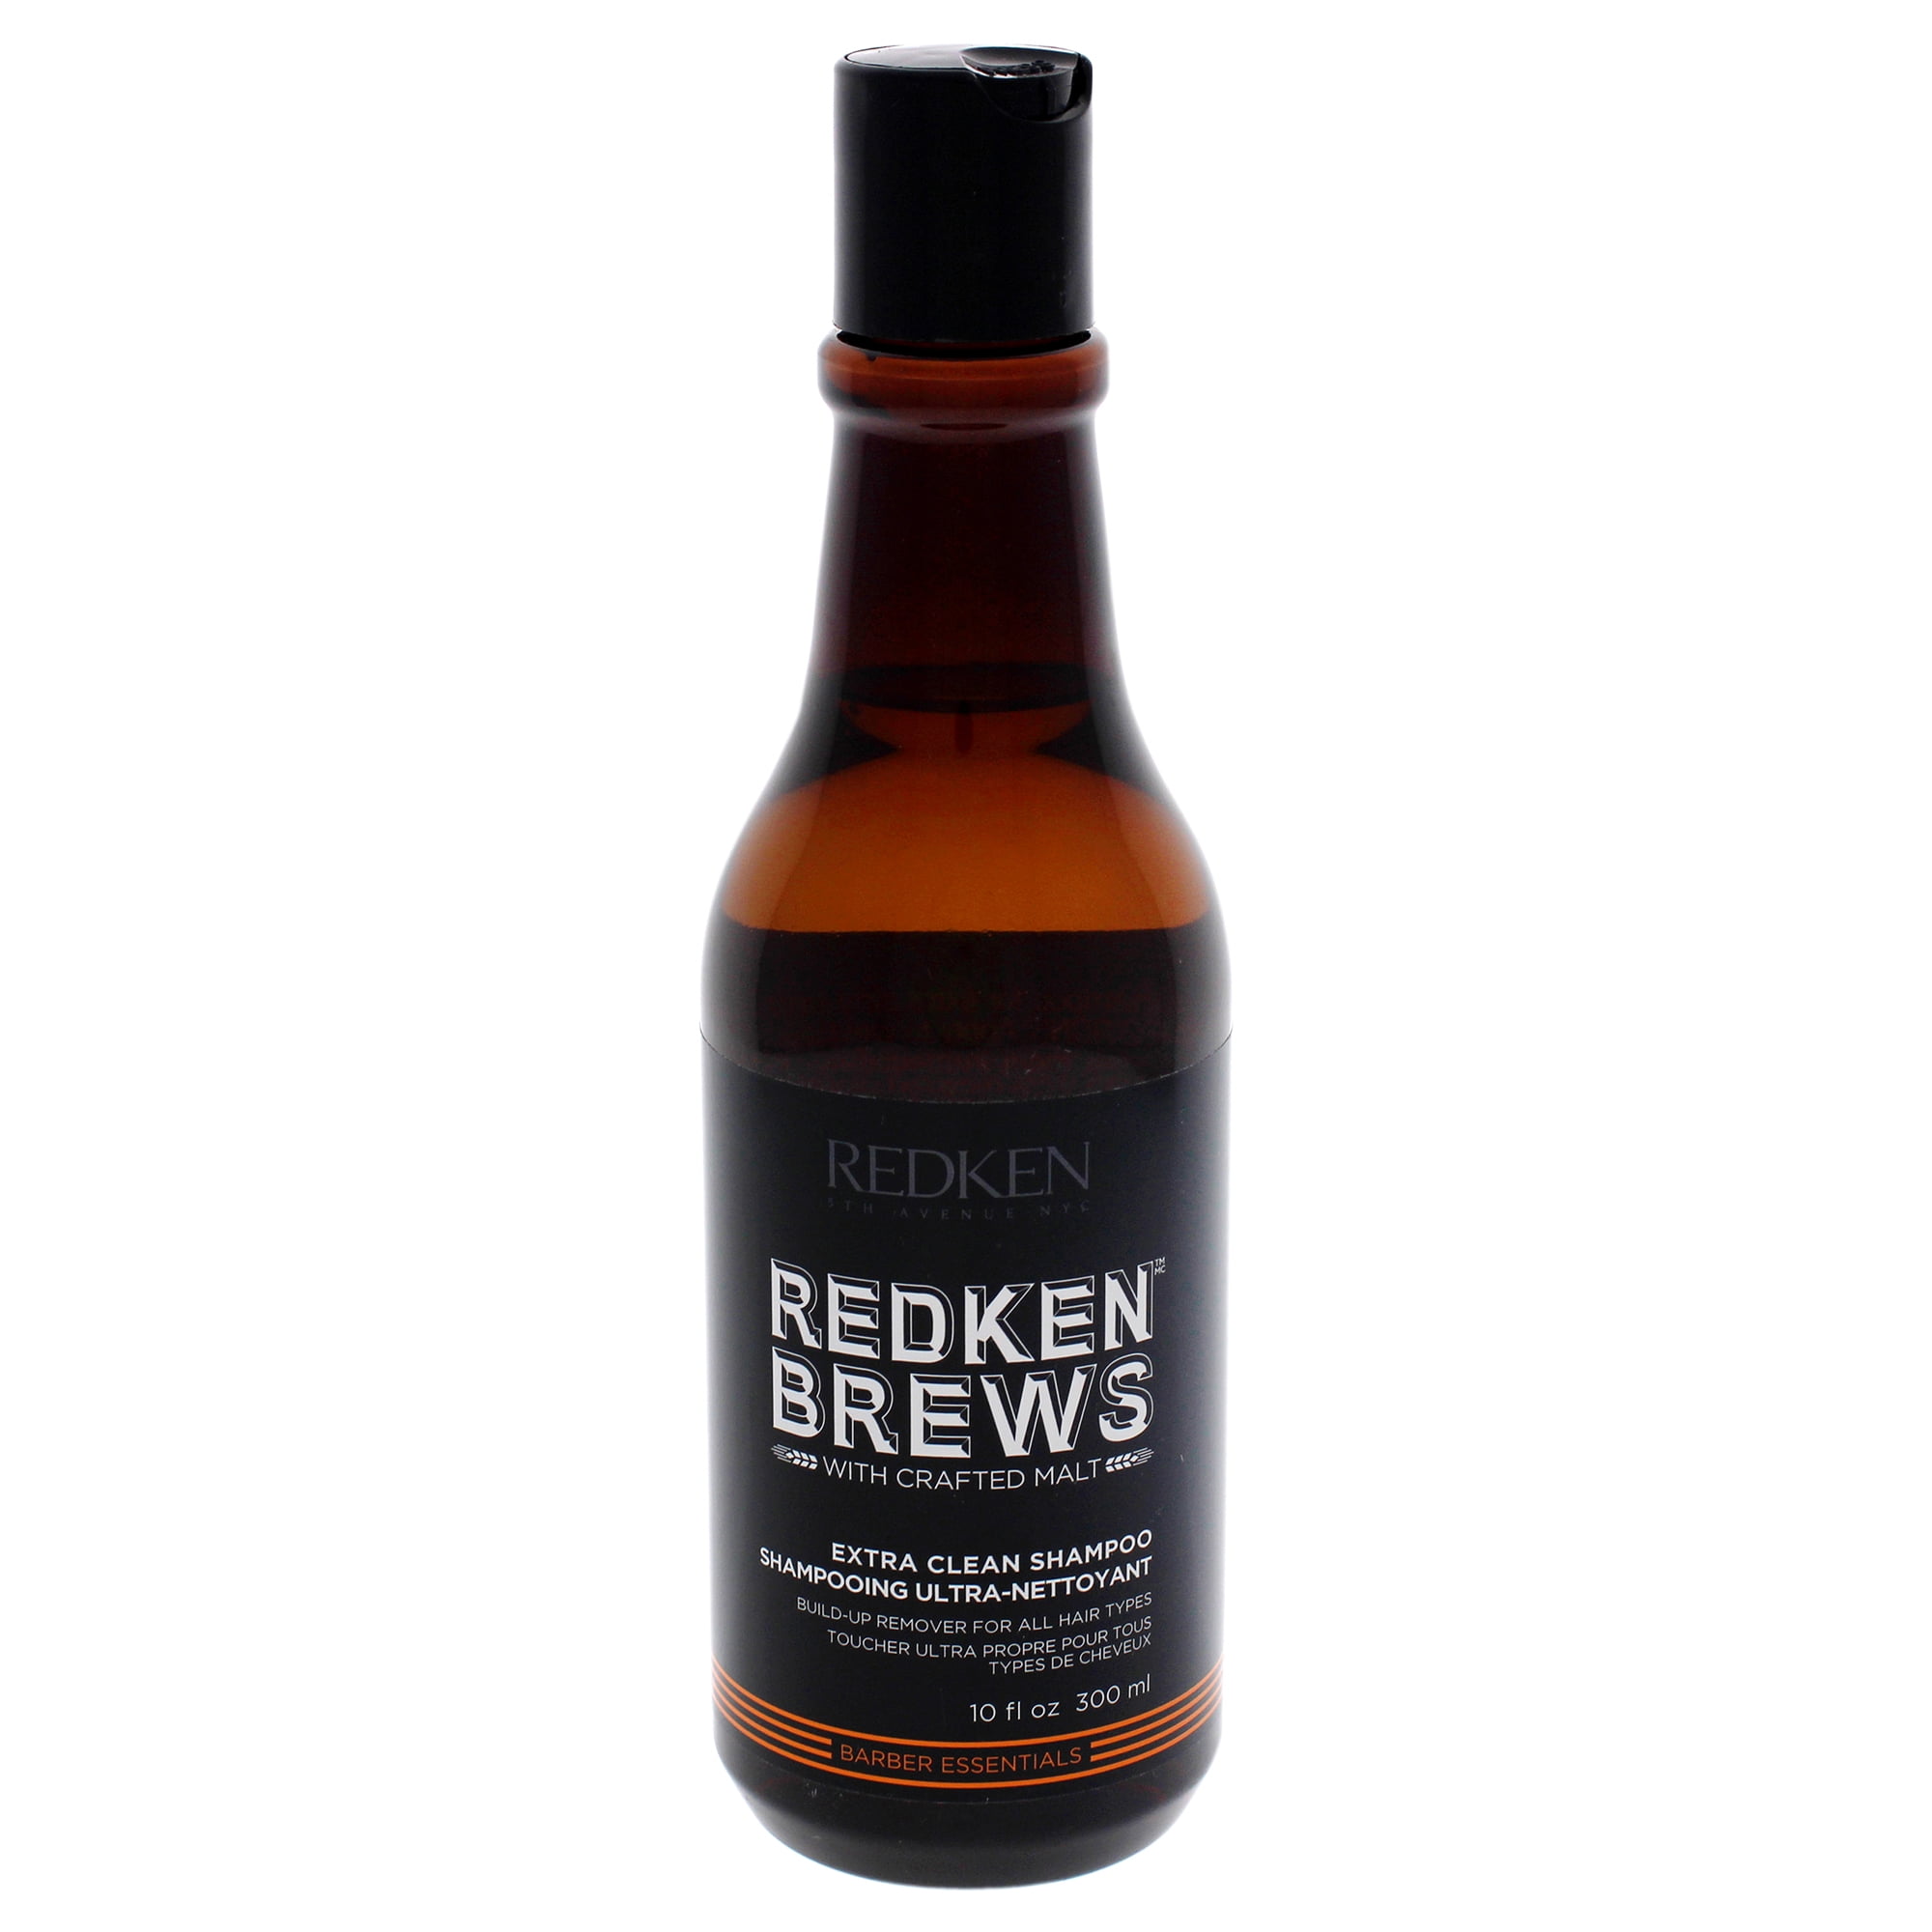 Redken For Men Anti Grit Clean Brew Extra Cleansing Shampoo